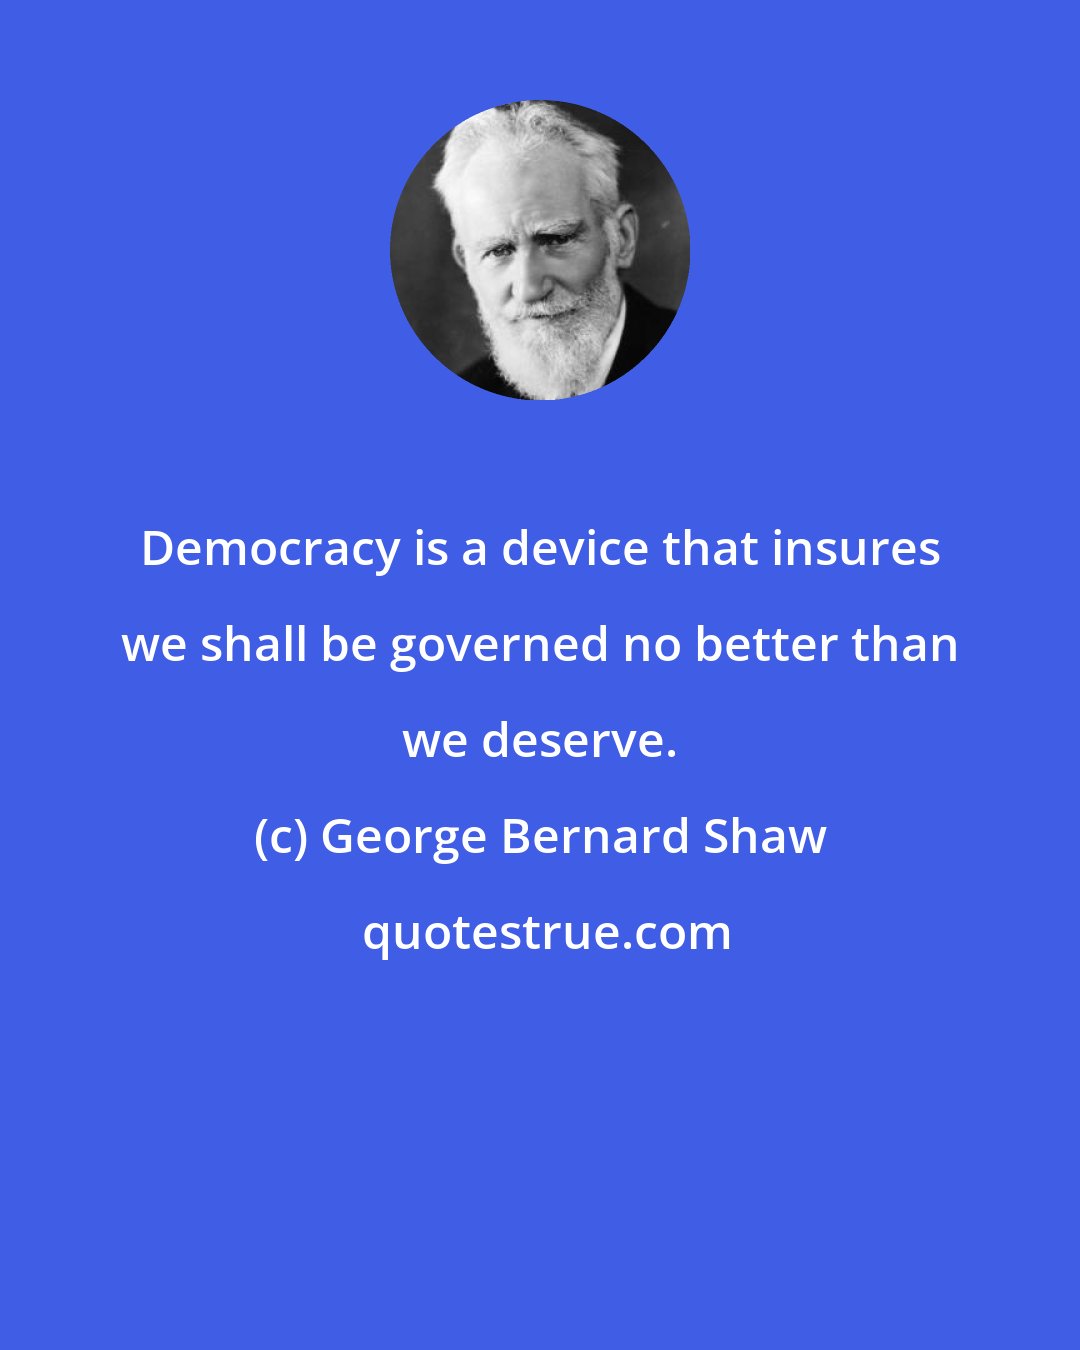 George Bernard Shaw: Democracy is a device that insures we shall be governed no better than we deserve.